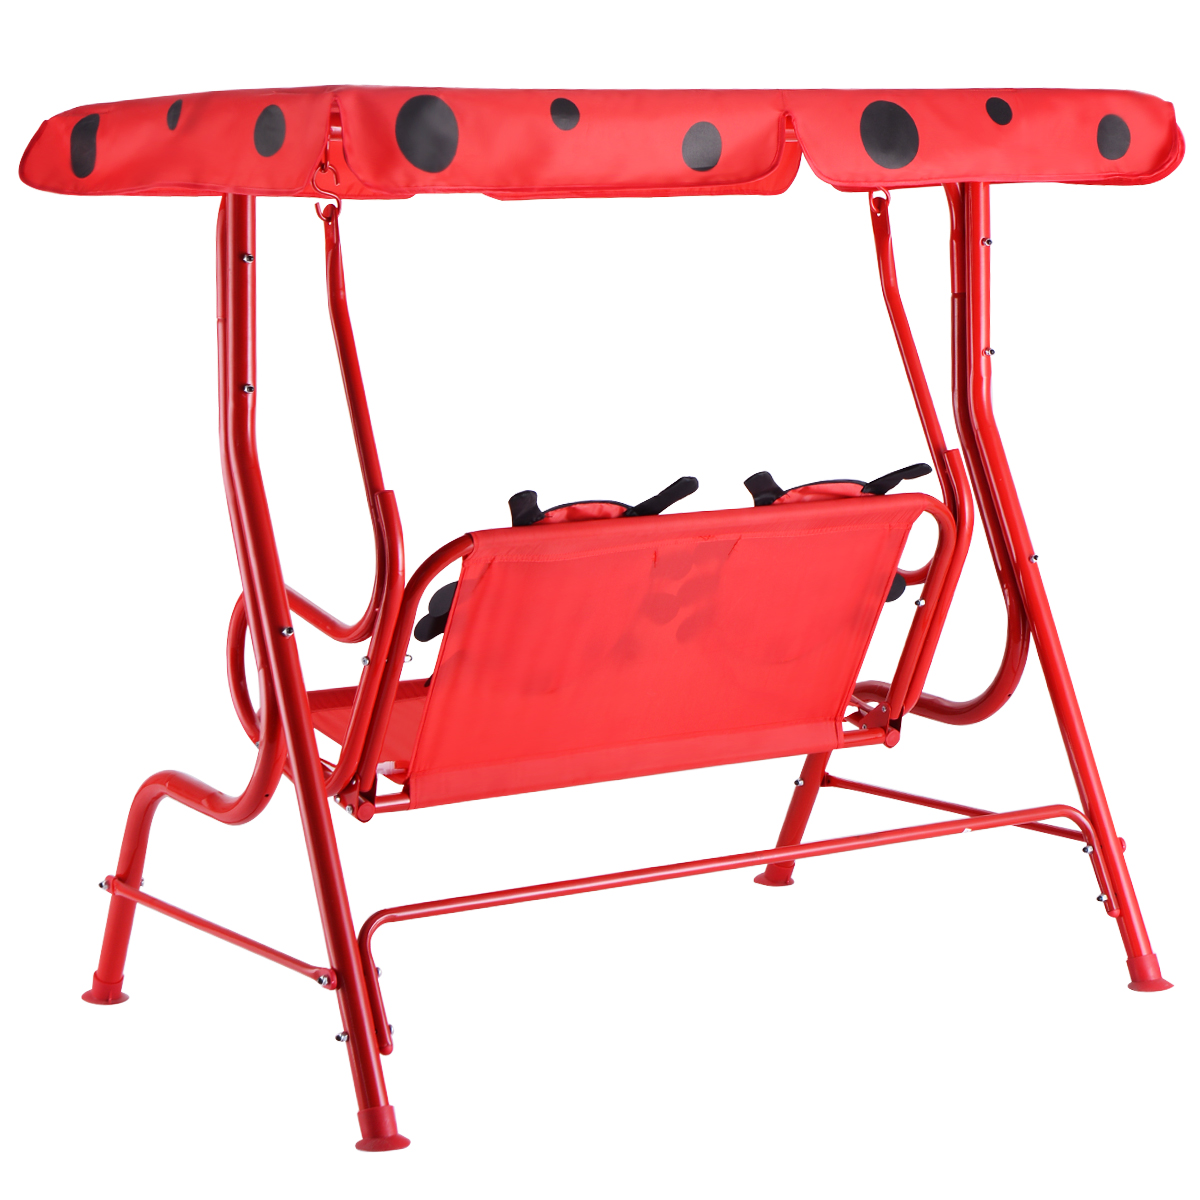 Costway Kids Patio Swing Chair Children Porch Bench Canopy 2 Person Yard Furniture red - image 2 of 10